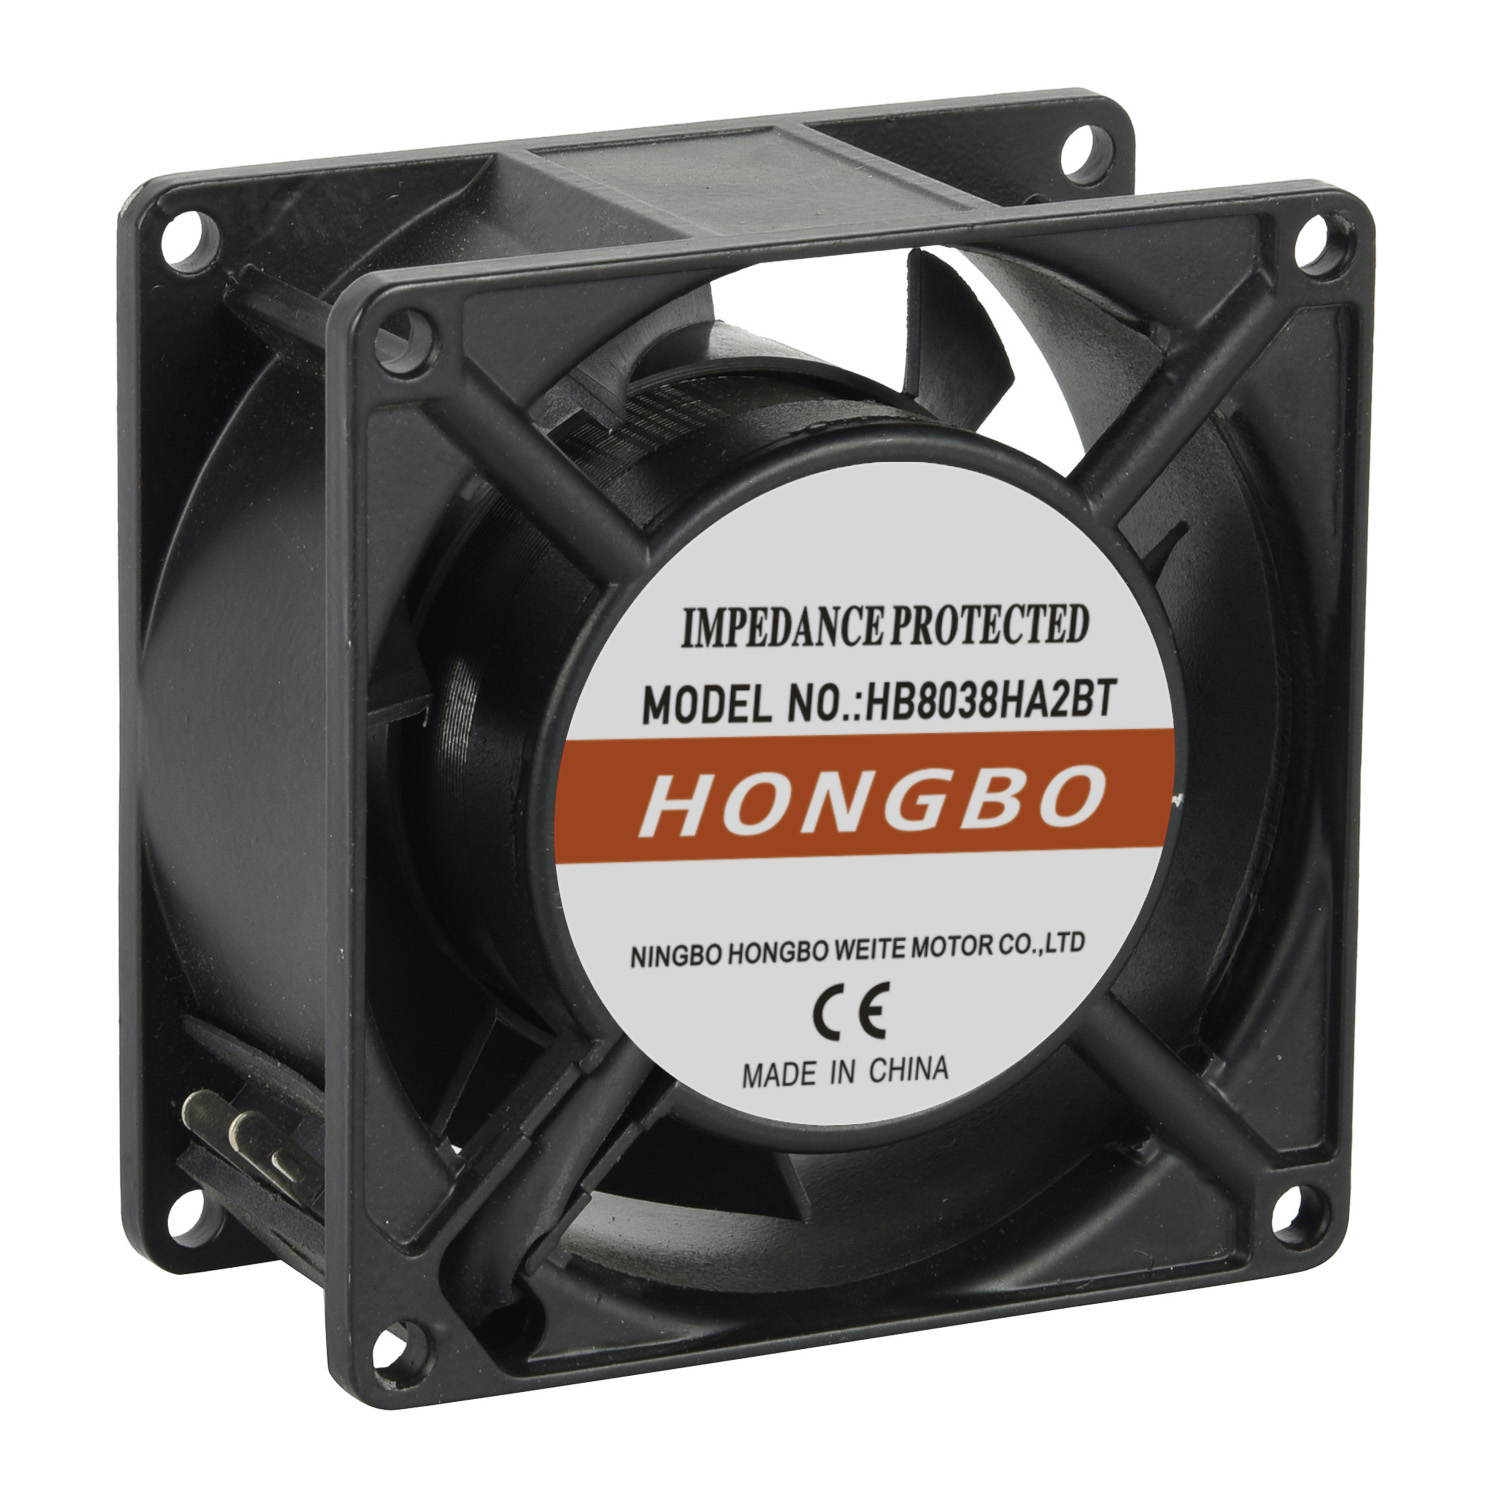 Hongbo 80mmx80mmx38mm High-Performance Industrial & Electronic AC 8038 Axial Cooling Fan